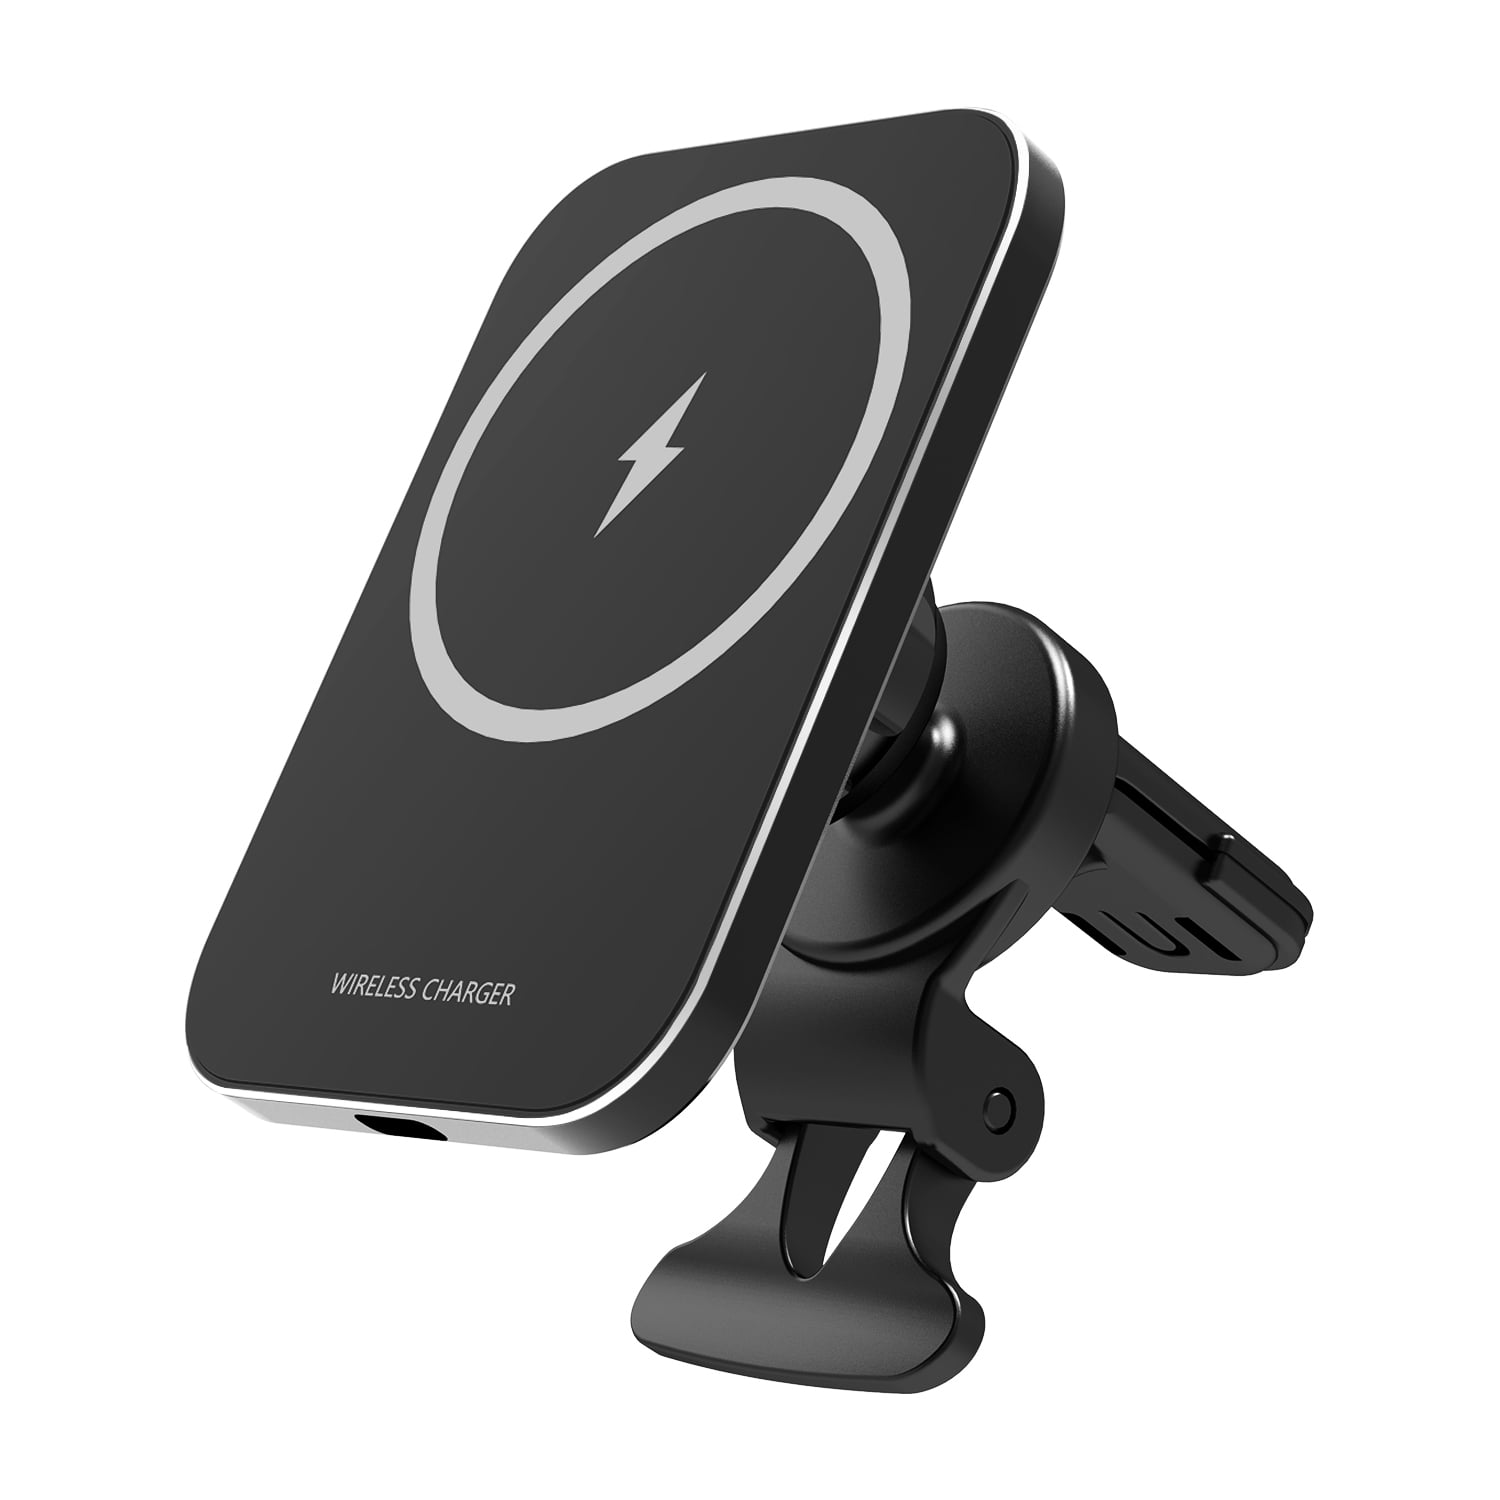 15W MagSafe Car Charger Mount iPhone Holder Black - Purified NZ